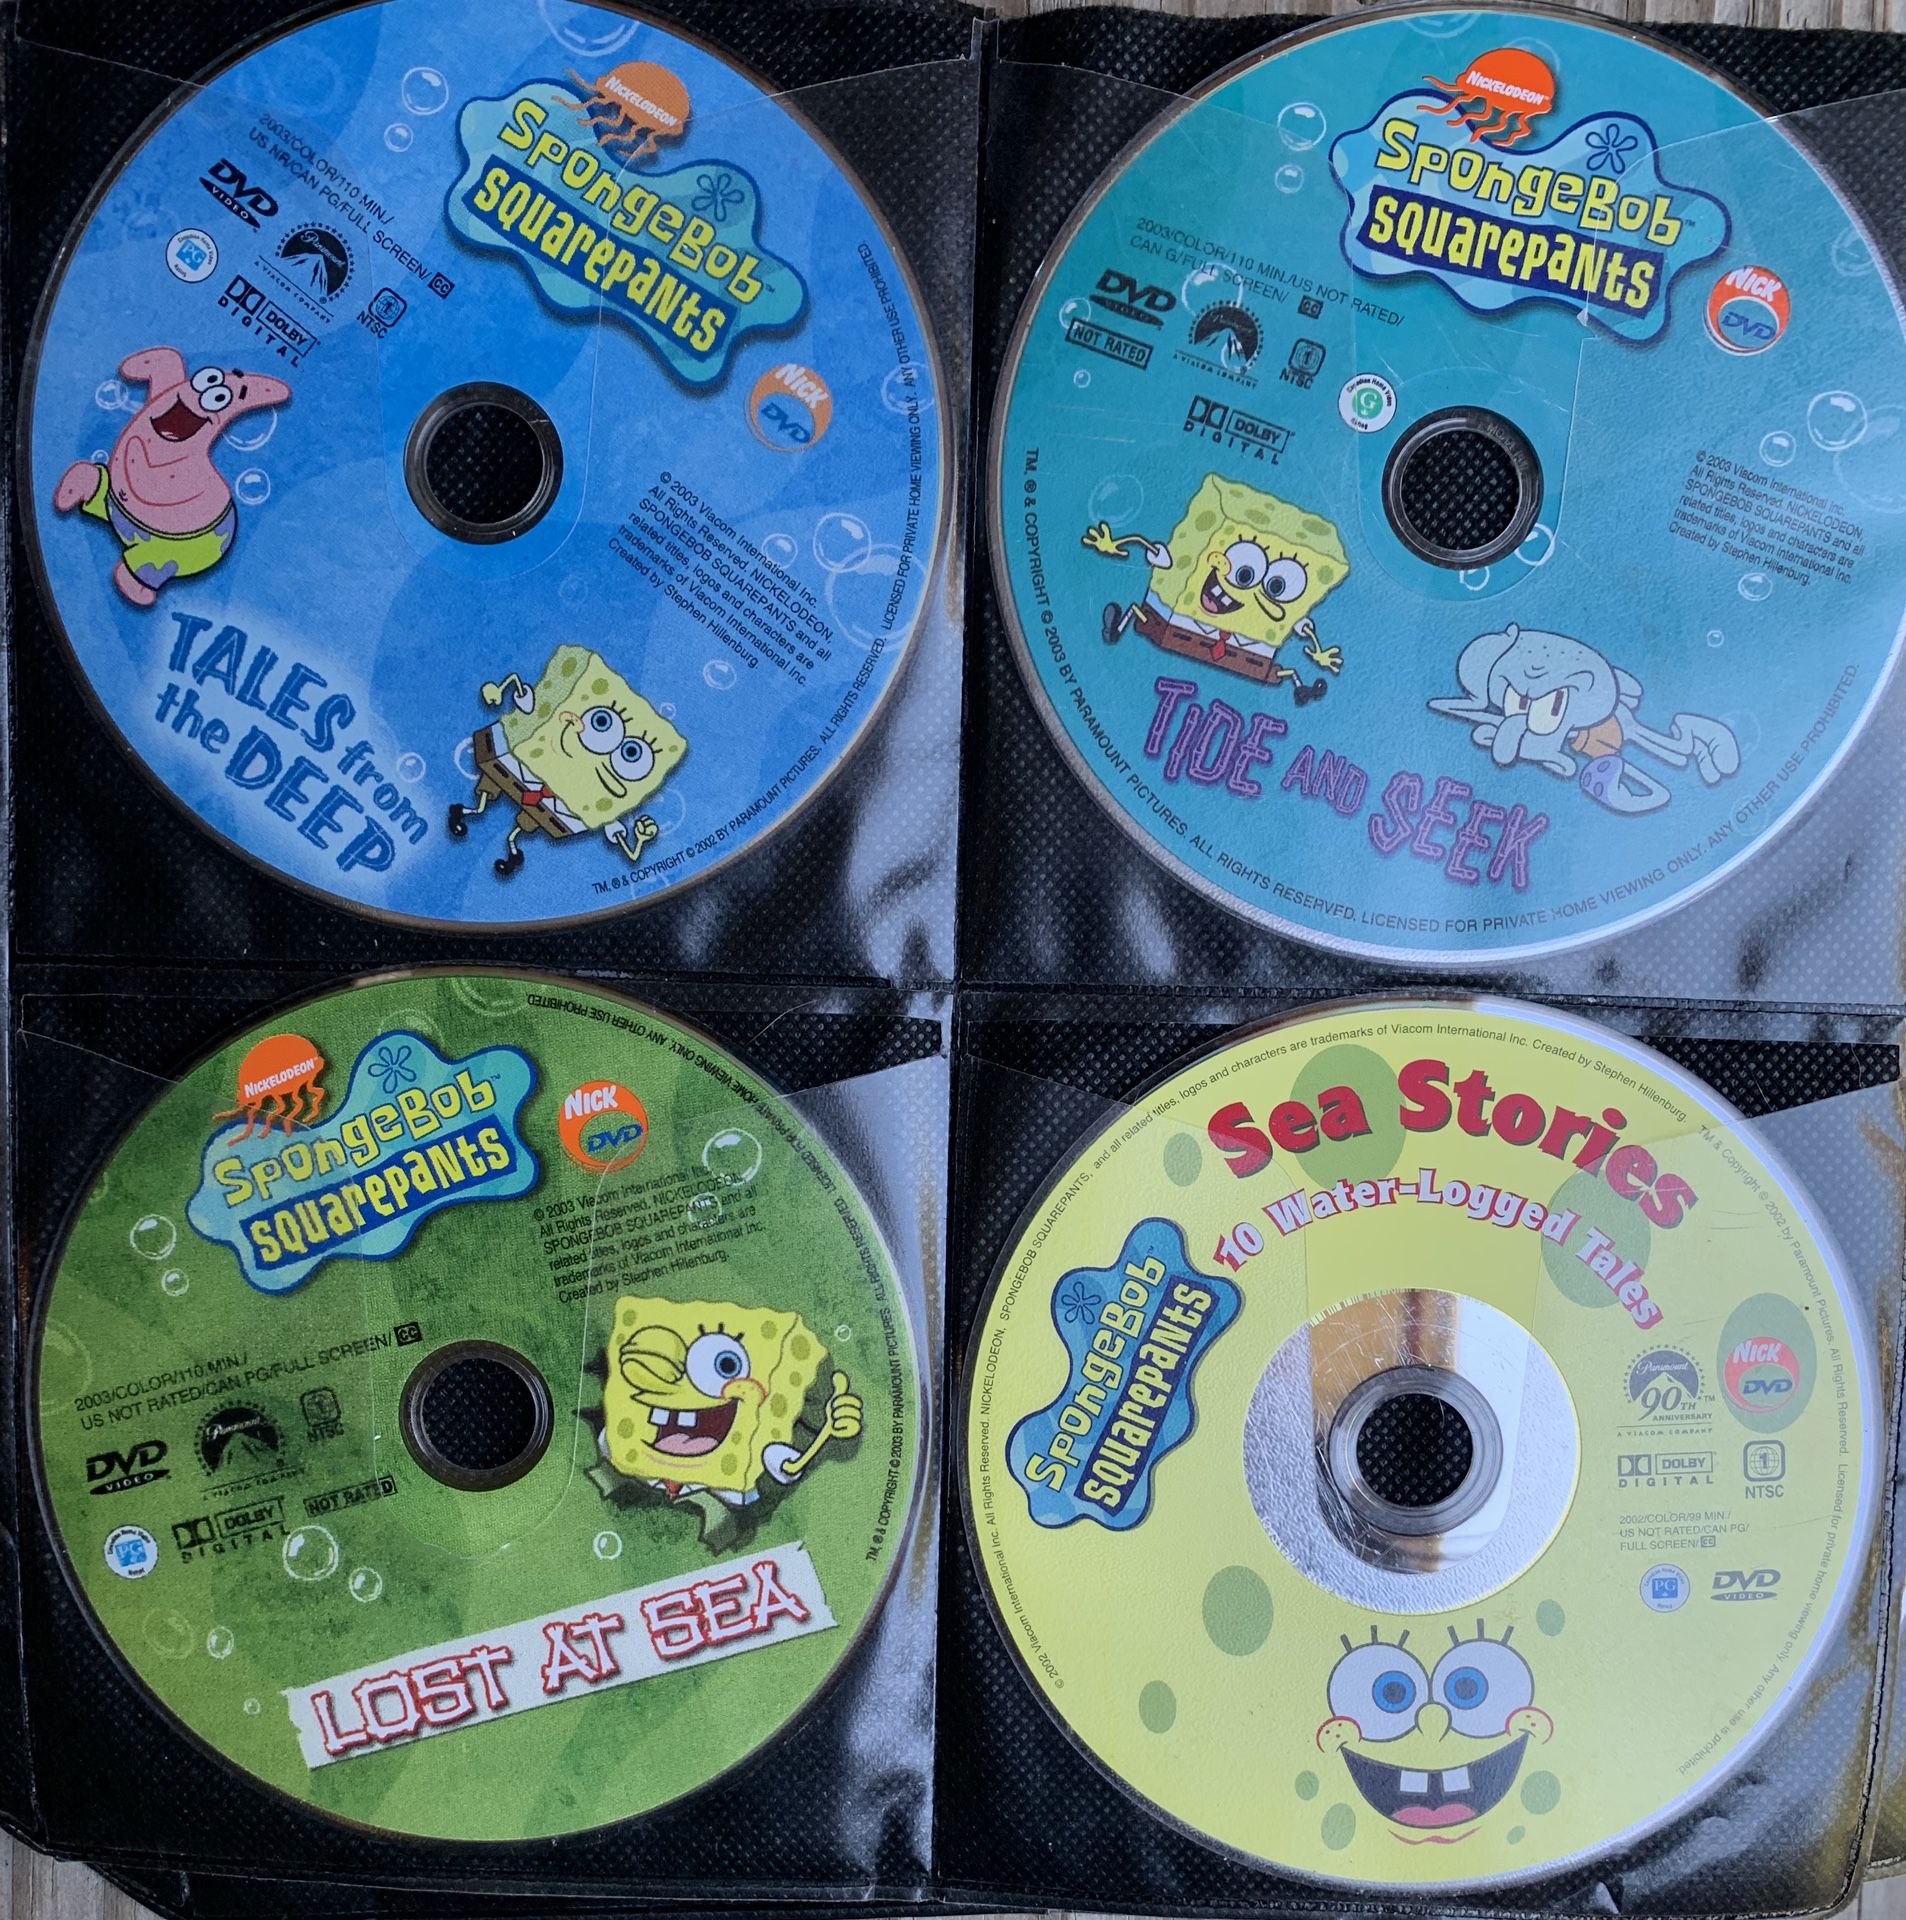 7 SPONGEBOB AND NICK PICKS DVDS. SELLING AS A GROUP. READ BELOW FOR SAVINGS INFO!